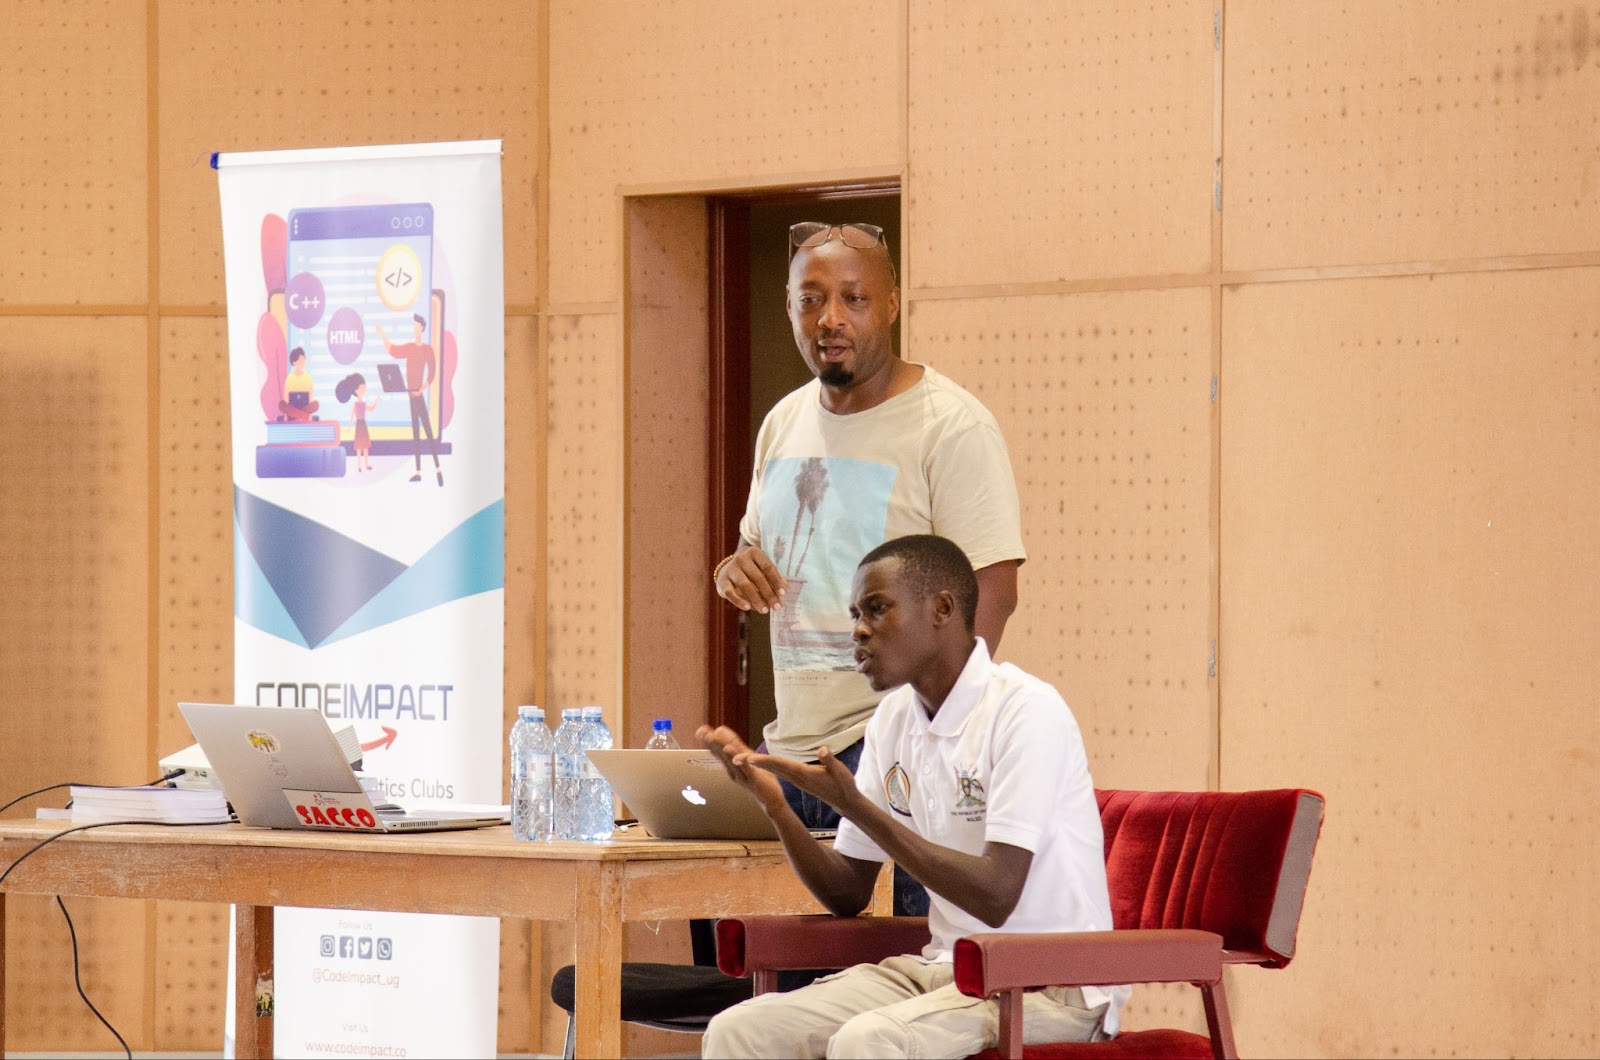 Alex Shyaka the CEO of codeimpact giving a  talk at Makerere University about inclusiveness in Tech